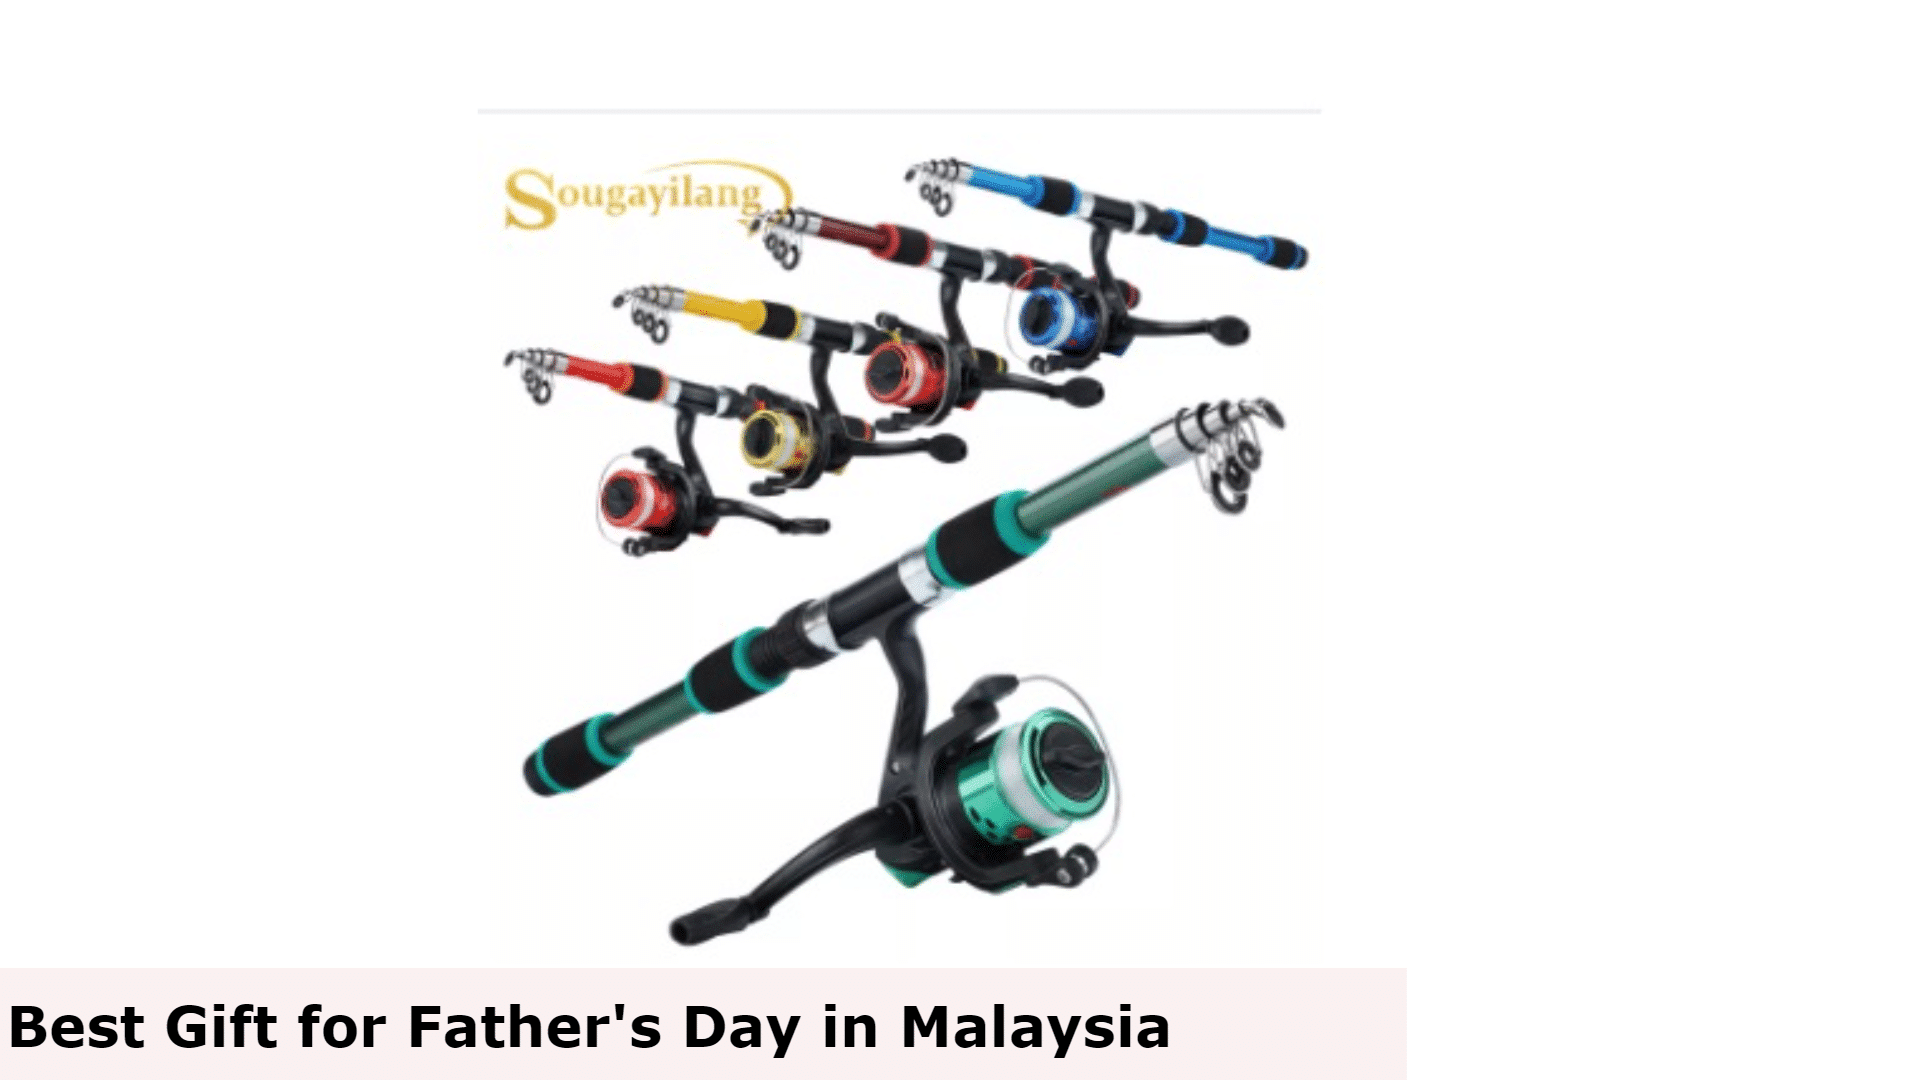 Fishing Rod - Best Gift for Father's Day in Malaysia, Best gift for Father's Day Malaysia, Best Father's Day Gifts for Dad, What do dads want for Father's Day in Malaysia?, What is a good cheap gift for Father's Day in Malaysia?, Do you give gifts on Father's Day in Malaysia?, gifts for dad who wants nothing, simple father's day gift ideas, father's day gift ideas 2022, father's day gift ideas during covid, father's day gift ideas from daughter, unique gifts for dad, father's day gift ideas from wife, fathers day gifts from son, What buy for a dad that doesn't want anything?, What to get a dad that is hard to buy for?, What should I get my boring dad for Christmas?, What gifts do dads like?,